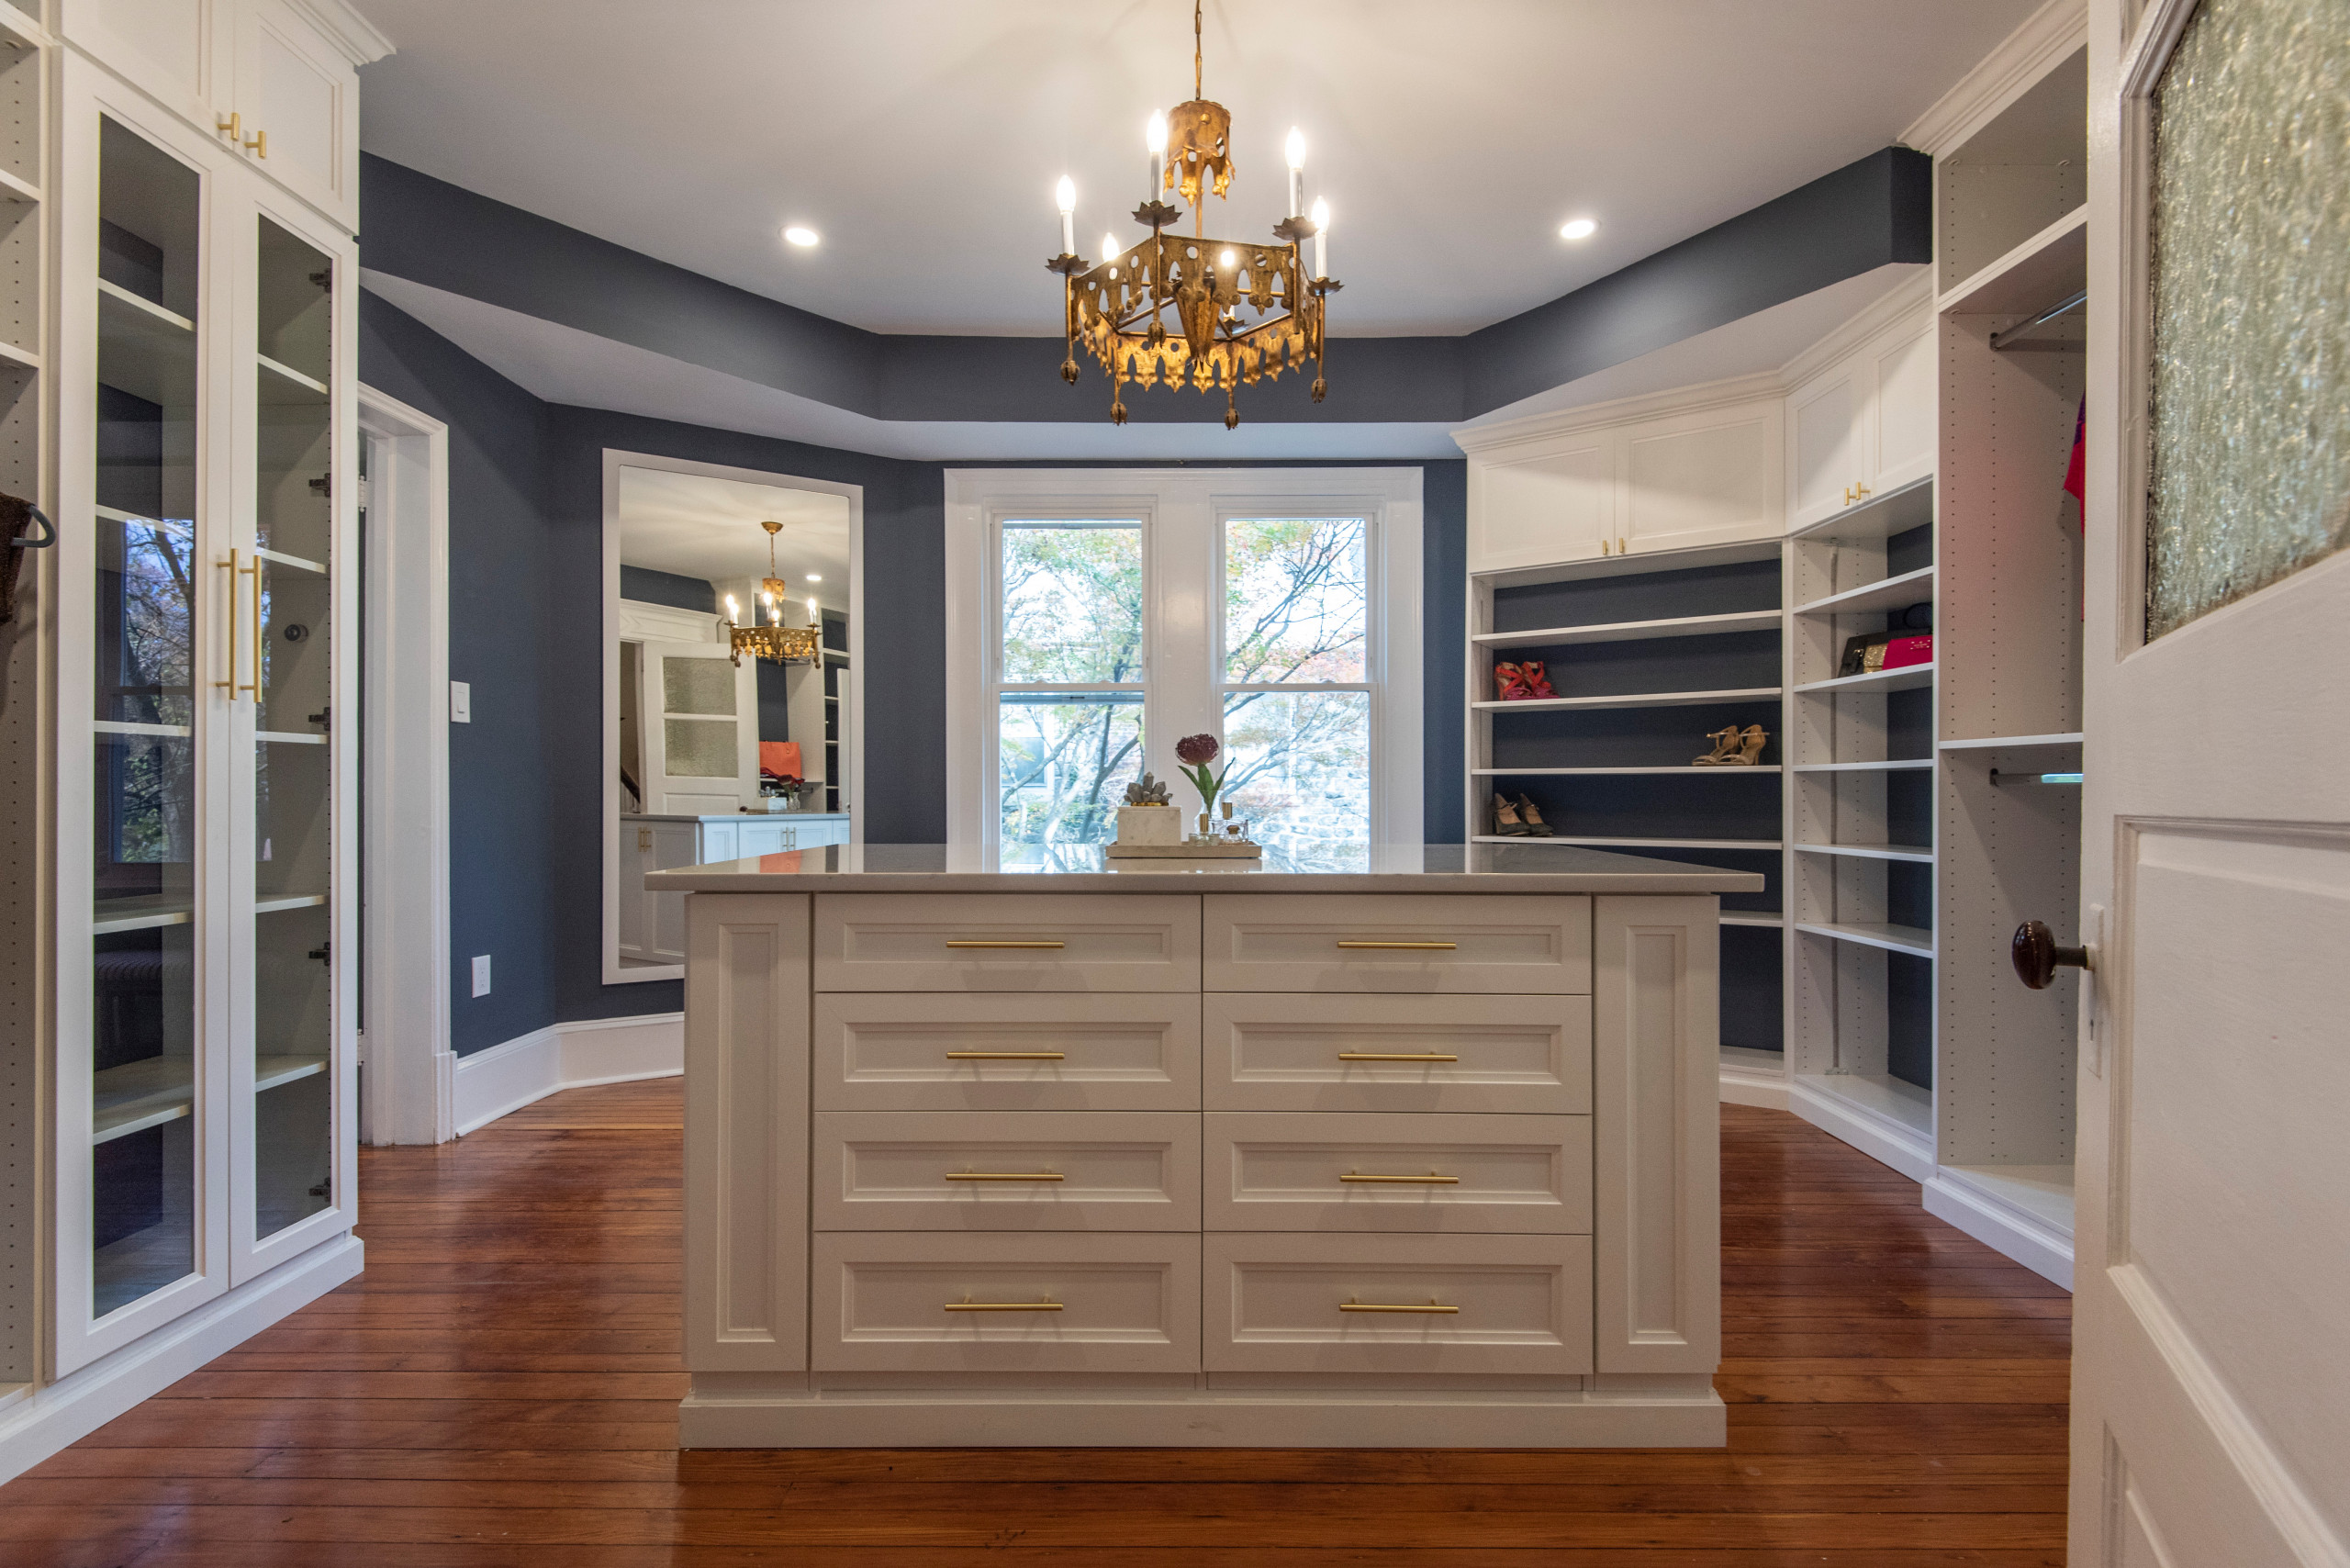 Beautiful Master Bedroom Closet renovation. Space now includes a Island with tons of drawers space. Cabinets with glass mullion doors to showcase your handbags. Adjustable shoe shelving with LED light